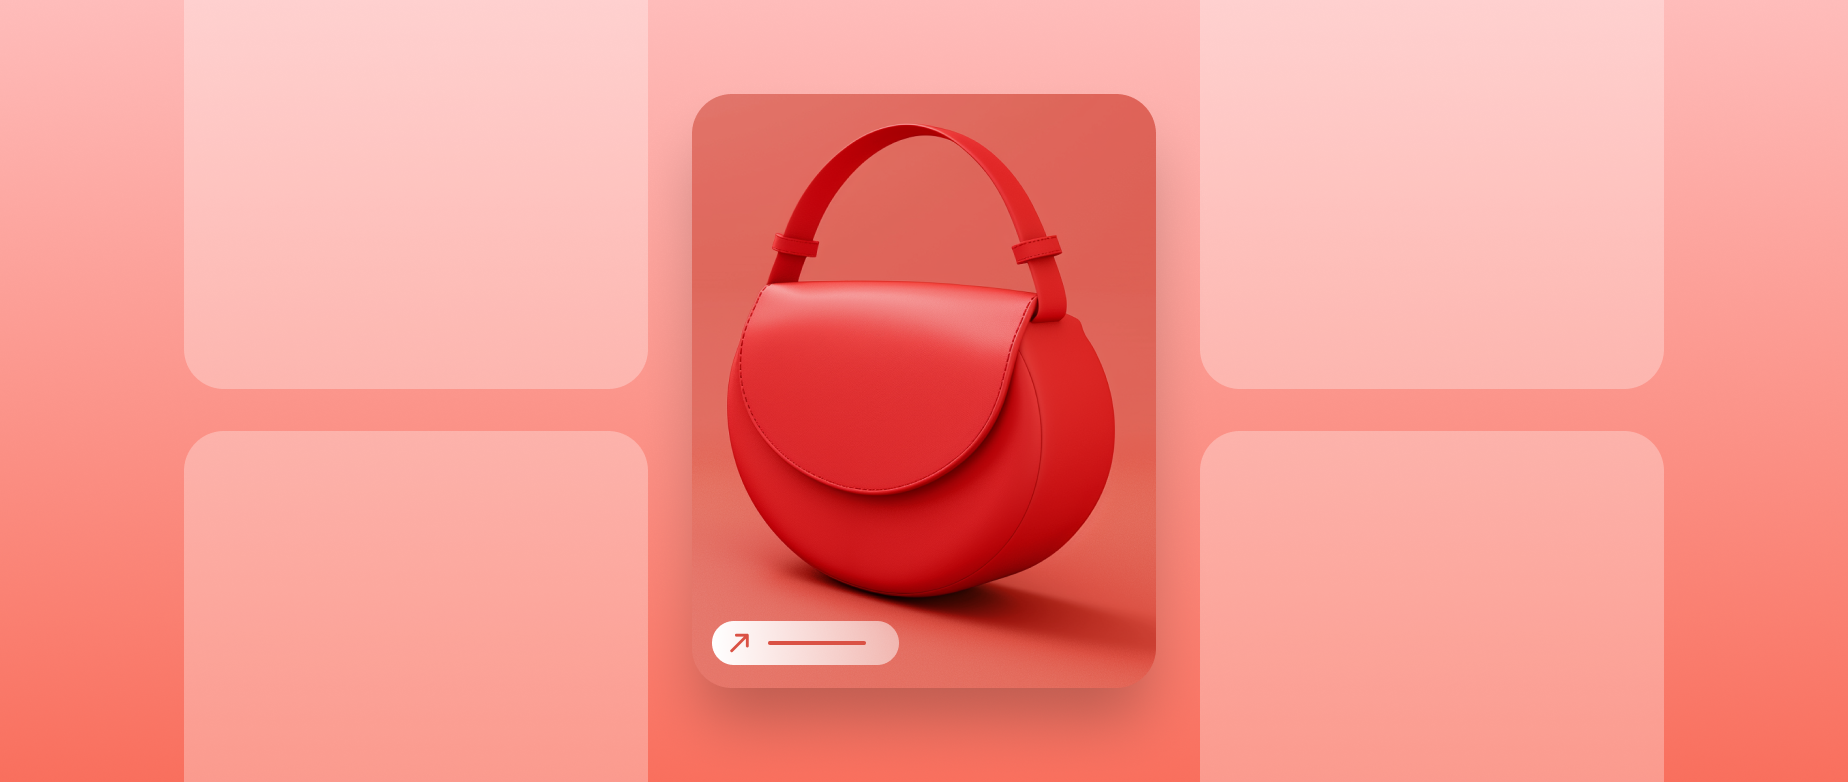 Illustration of a purse for sale on Pinterest